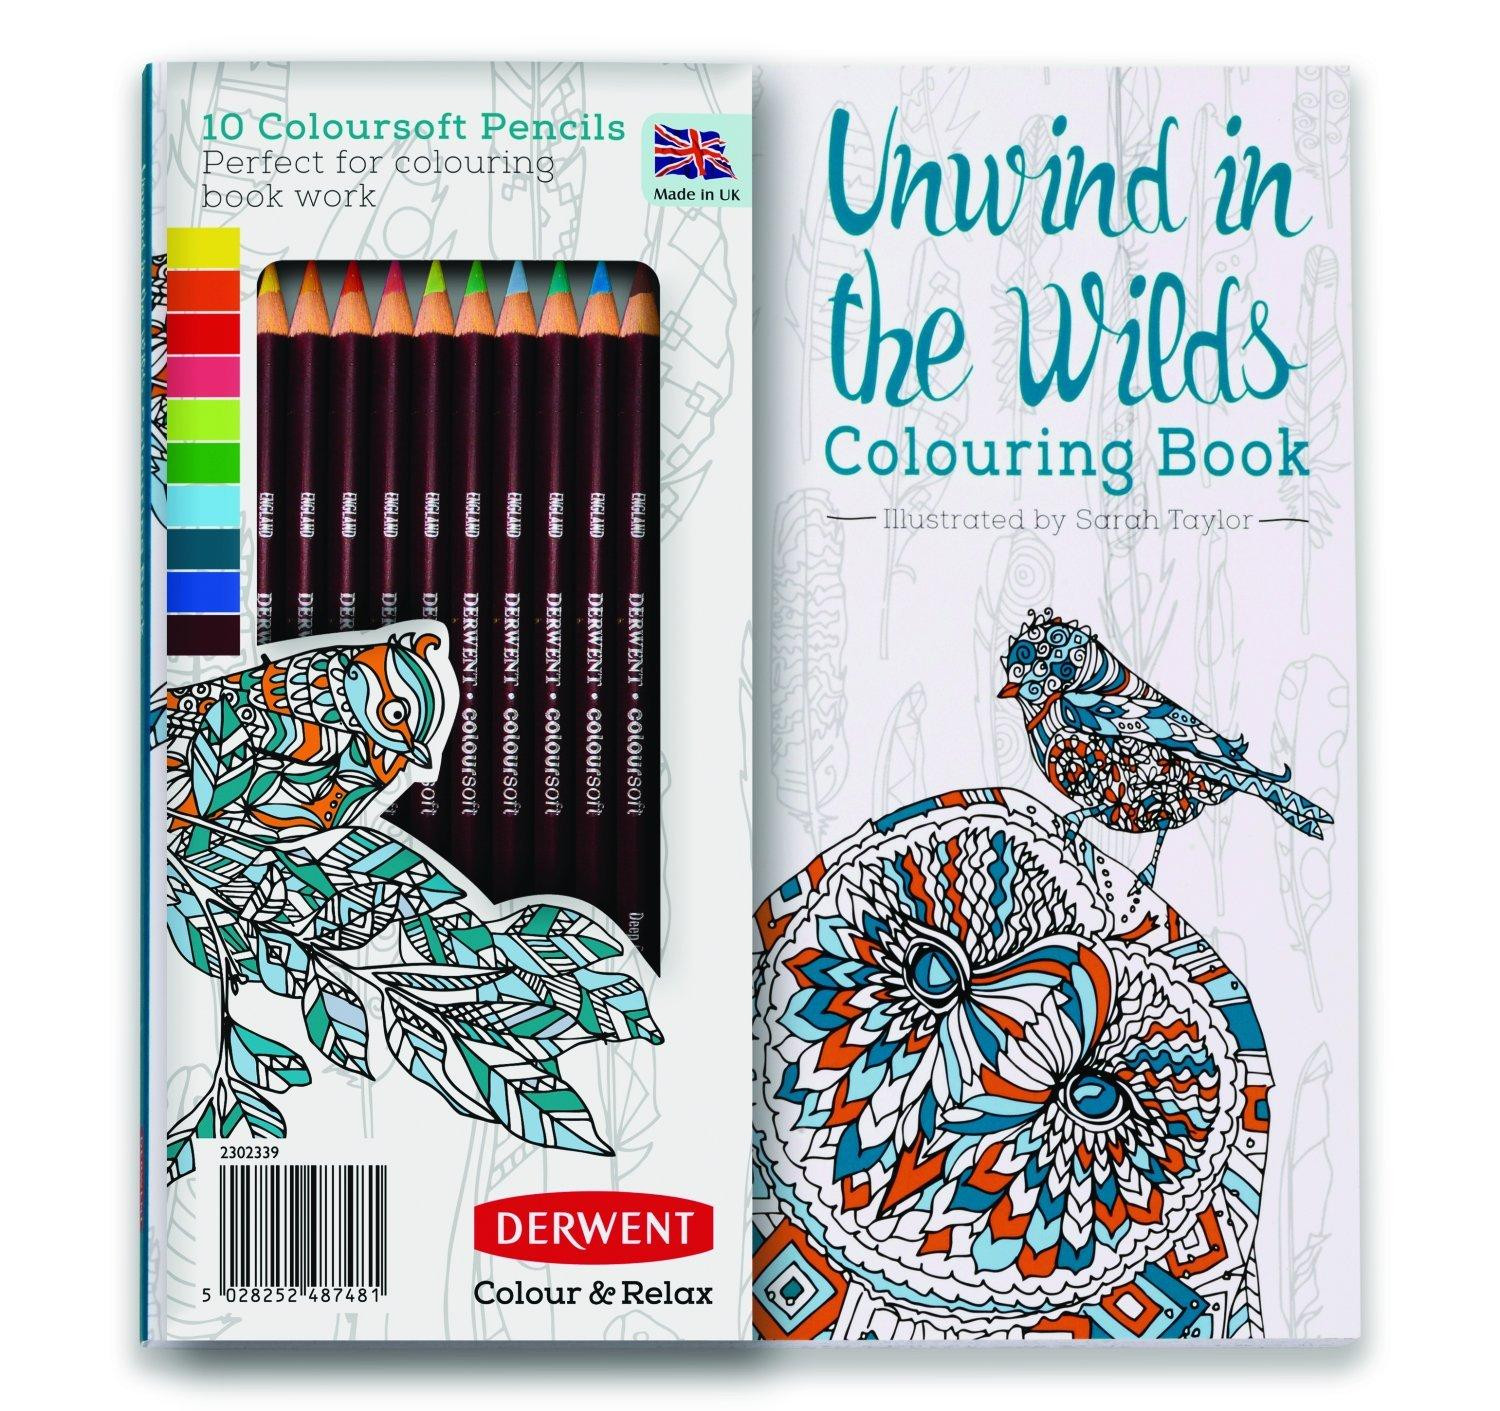 Adult Coloring Book Amazon
 Amazon Adult Coloring Book and Colorsoft Colored